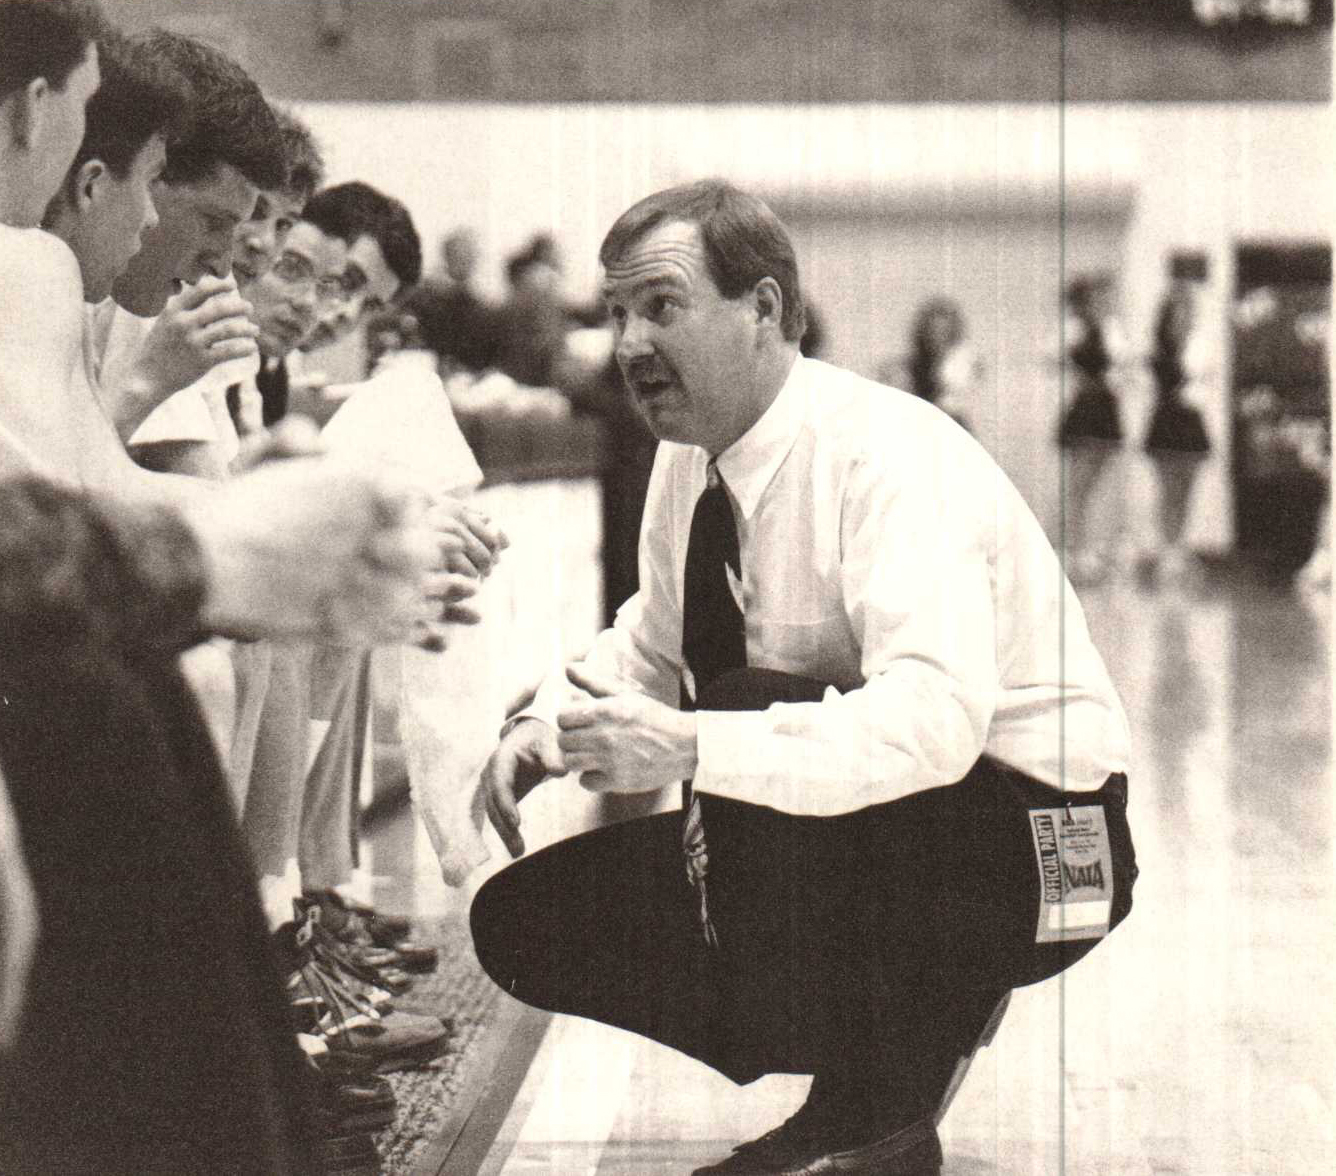 Historical photograph of Bob Olson crouching in a huddle in front of large group of student athletes seated in gymnasium